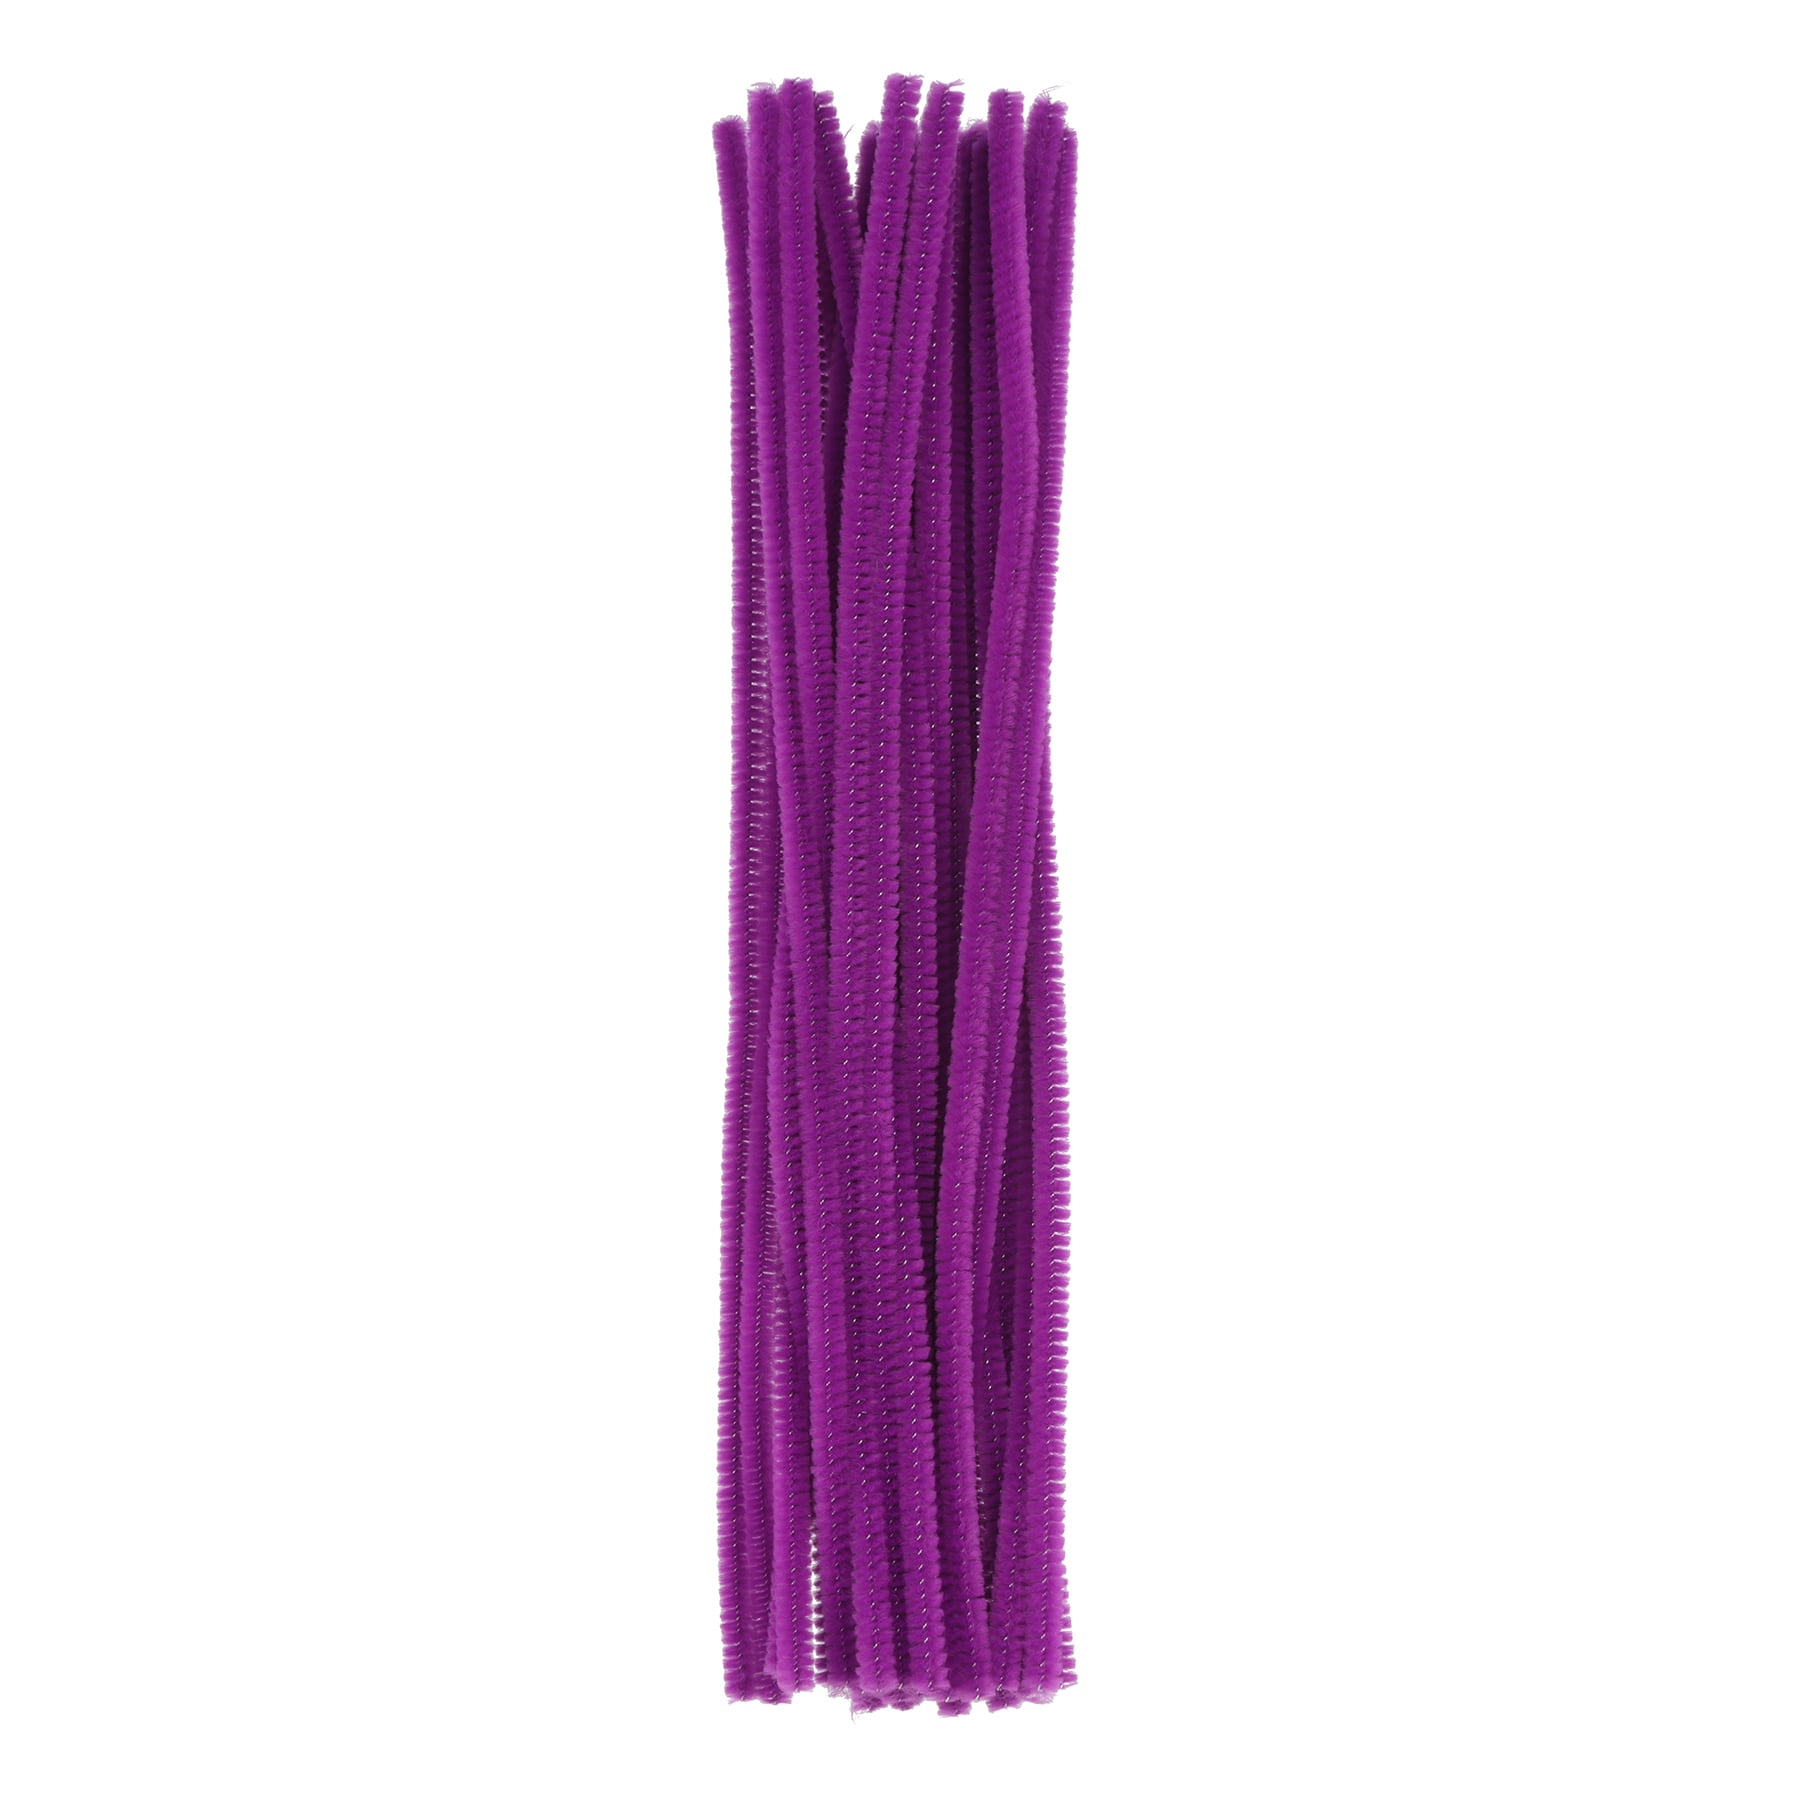 24 Packs: 25 ct. (600 total) Purple Chenille Pipe Cleaners by Creatology™